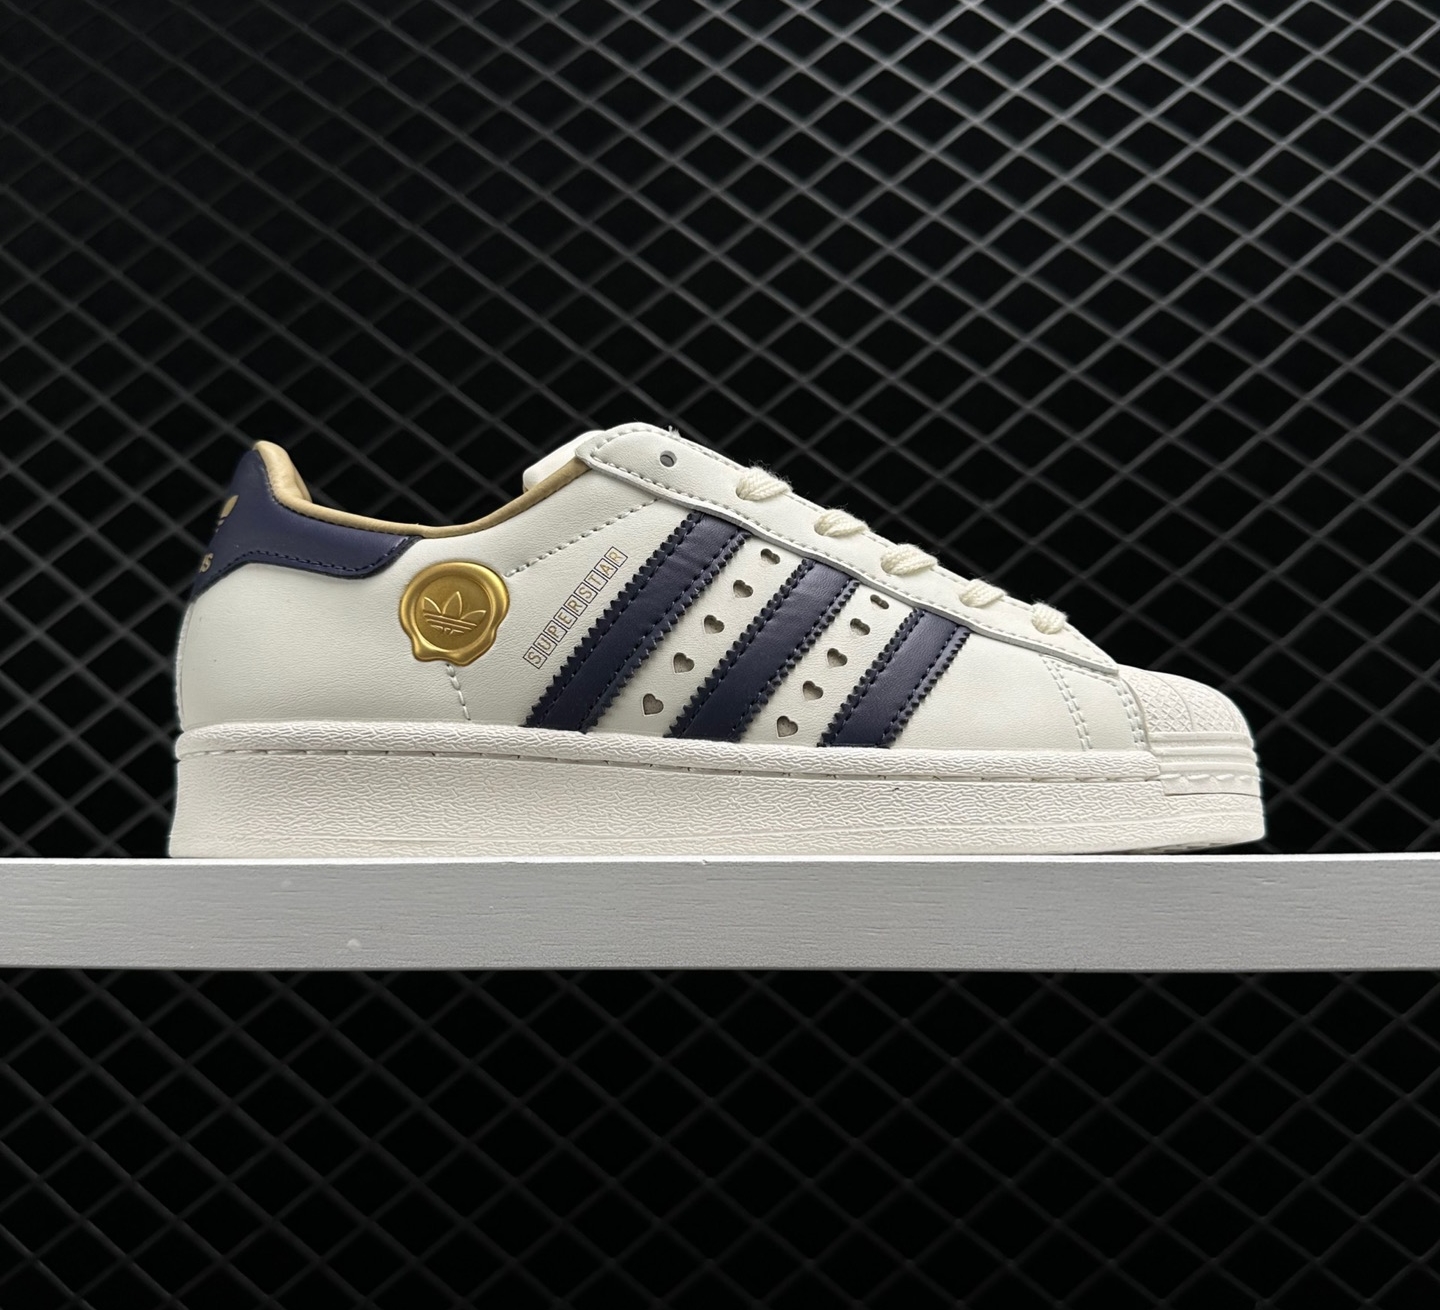 Adidas Originals Superstar Off White Shadow Navy IE6977 - Classic Style with a Modern Twist!